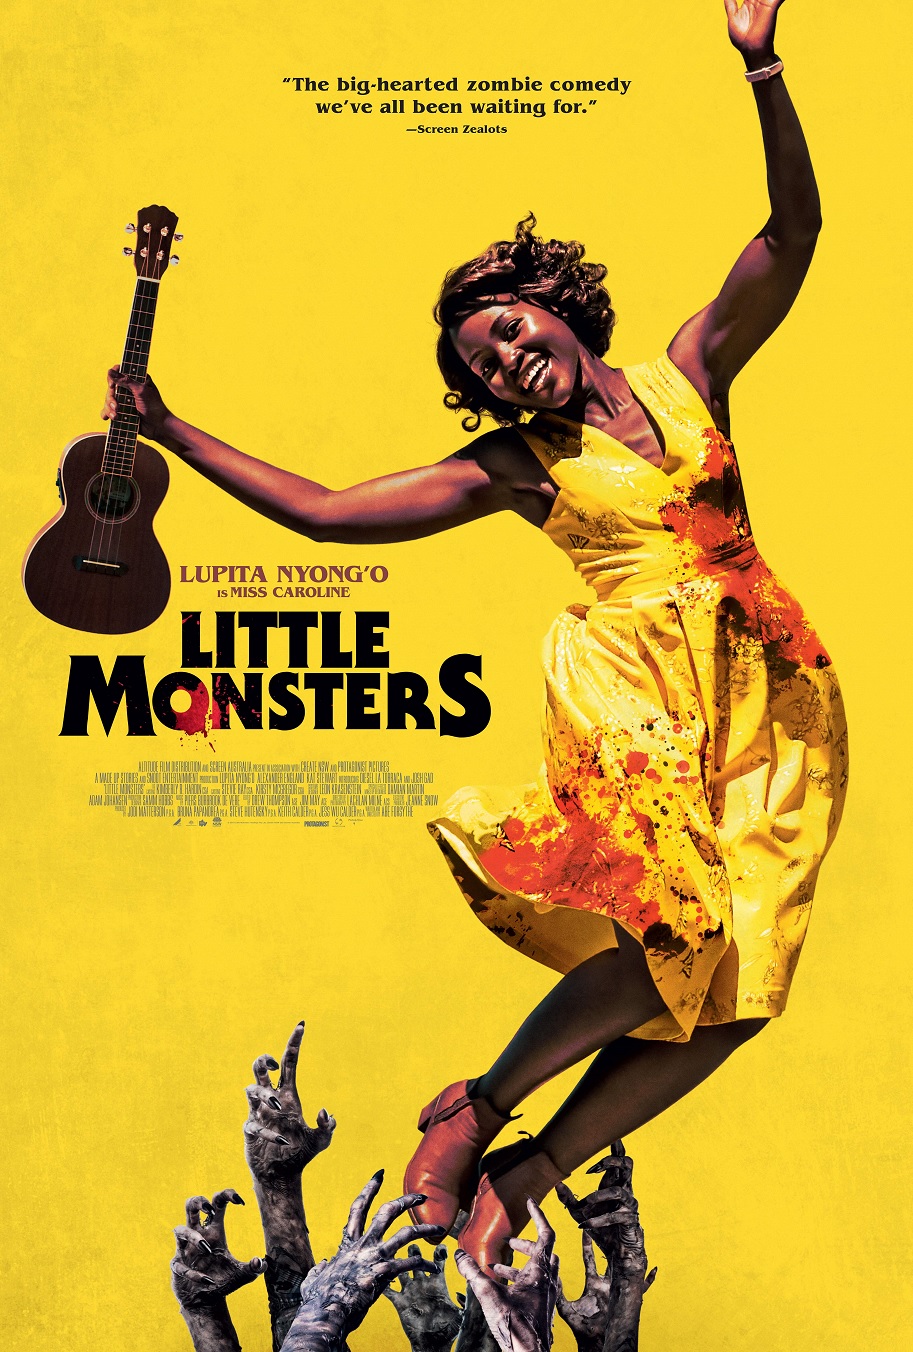 Little Monsters Abe Forsythe Lupita Nyong'o